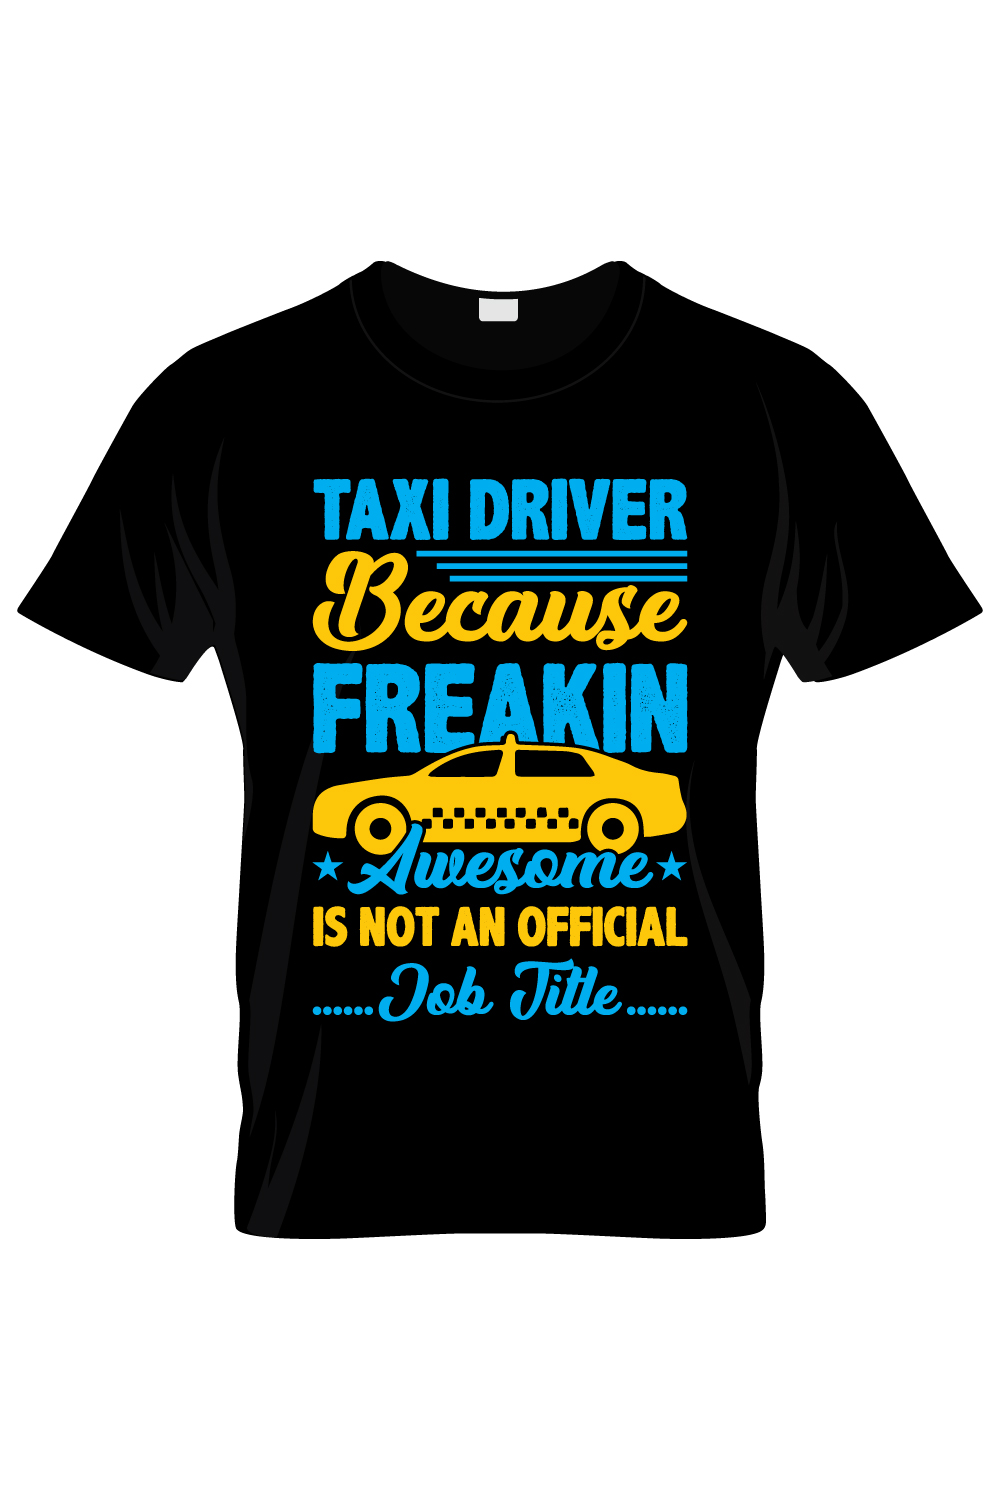 Image of a t-shirt with a colorful taxi print and lettering